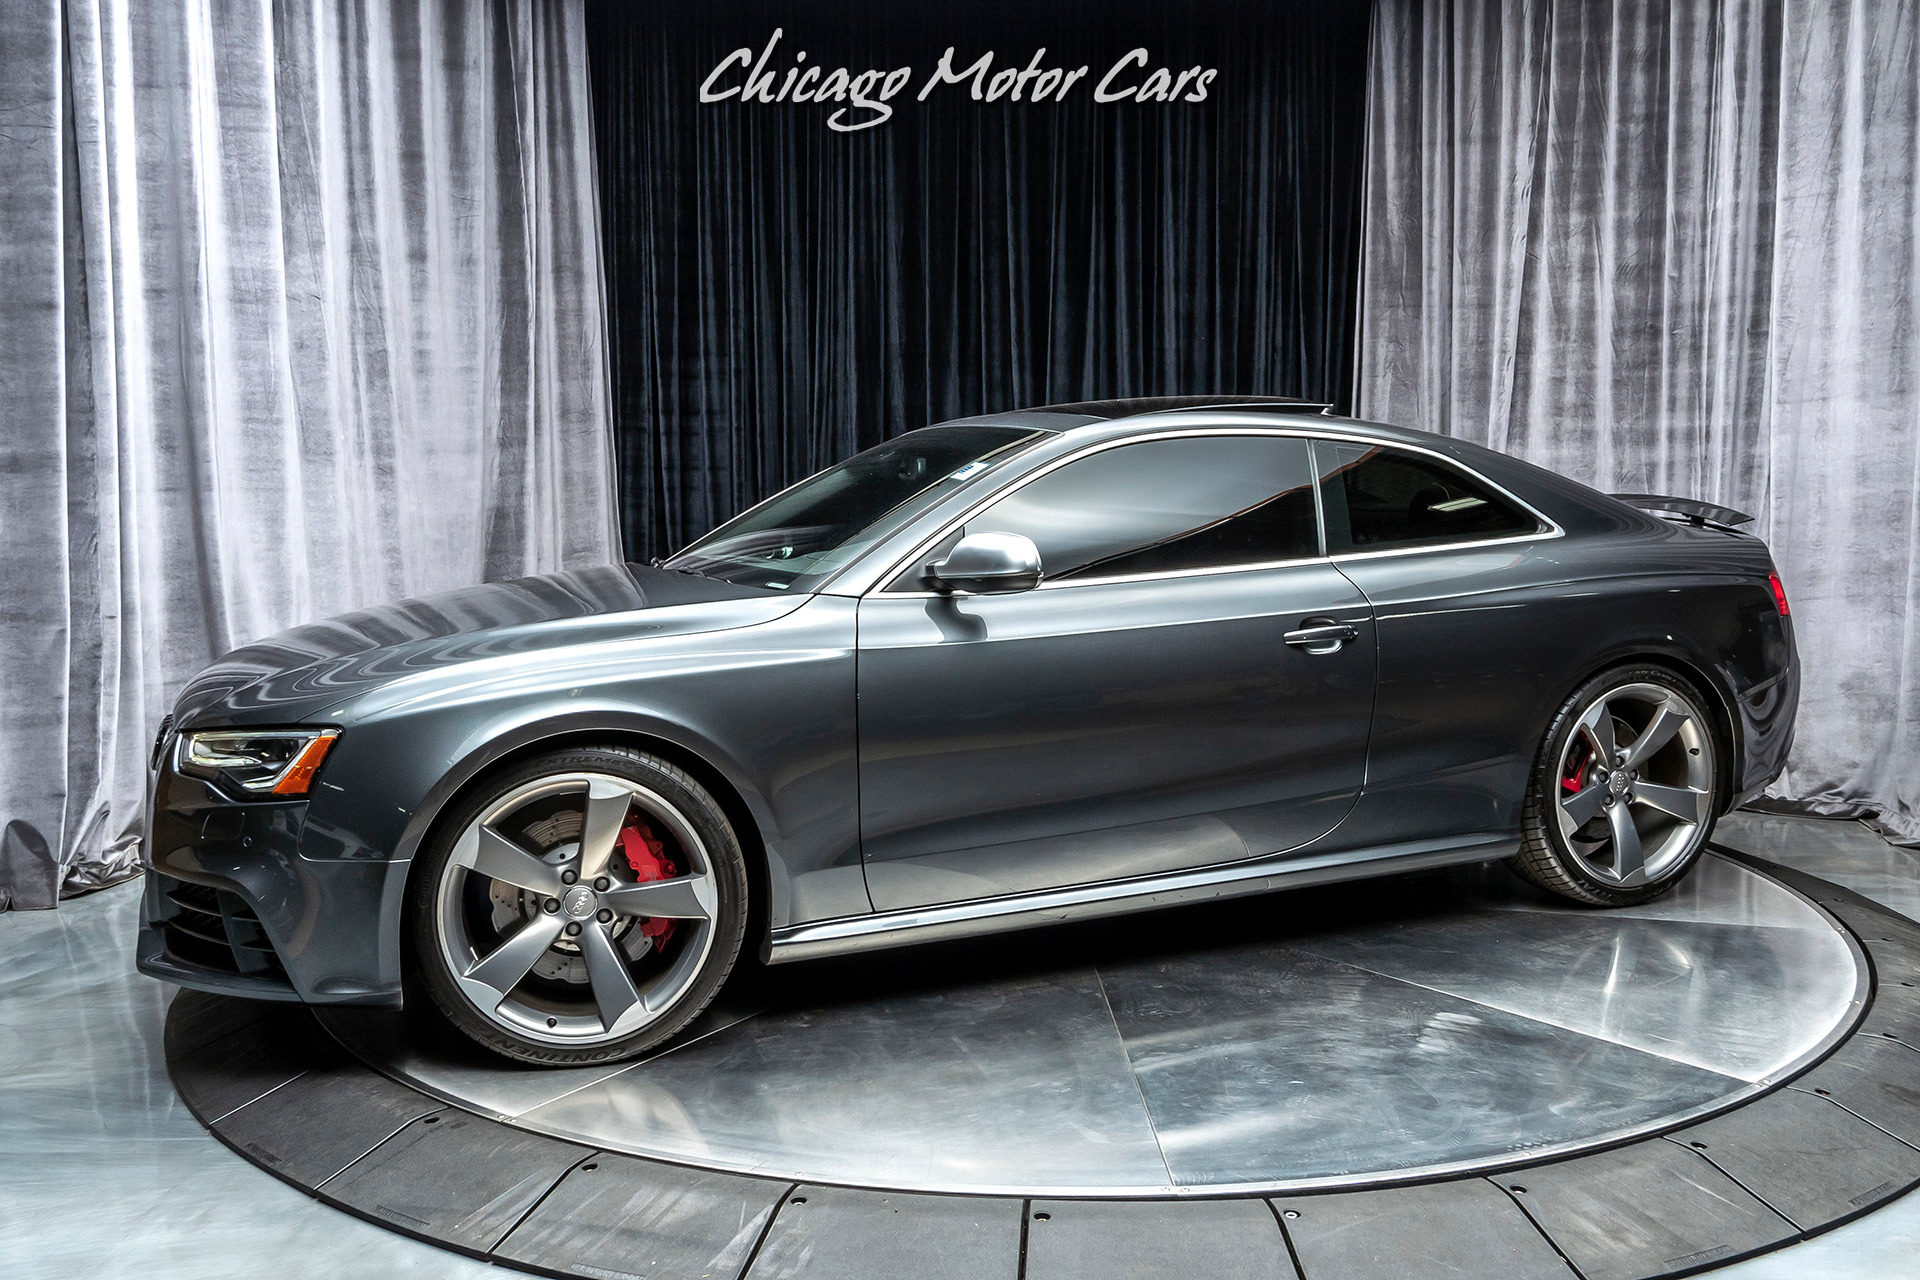 Used 2015 Audi RS5 quattro S tronic Coupe MSRP $78k+ TECHNOLOGY PACKAGE!  For Sale (Special Pricing) | Chicago Motor Cars Stock #16159C